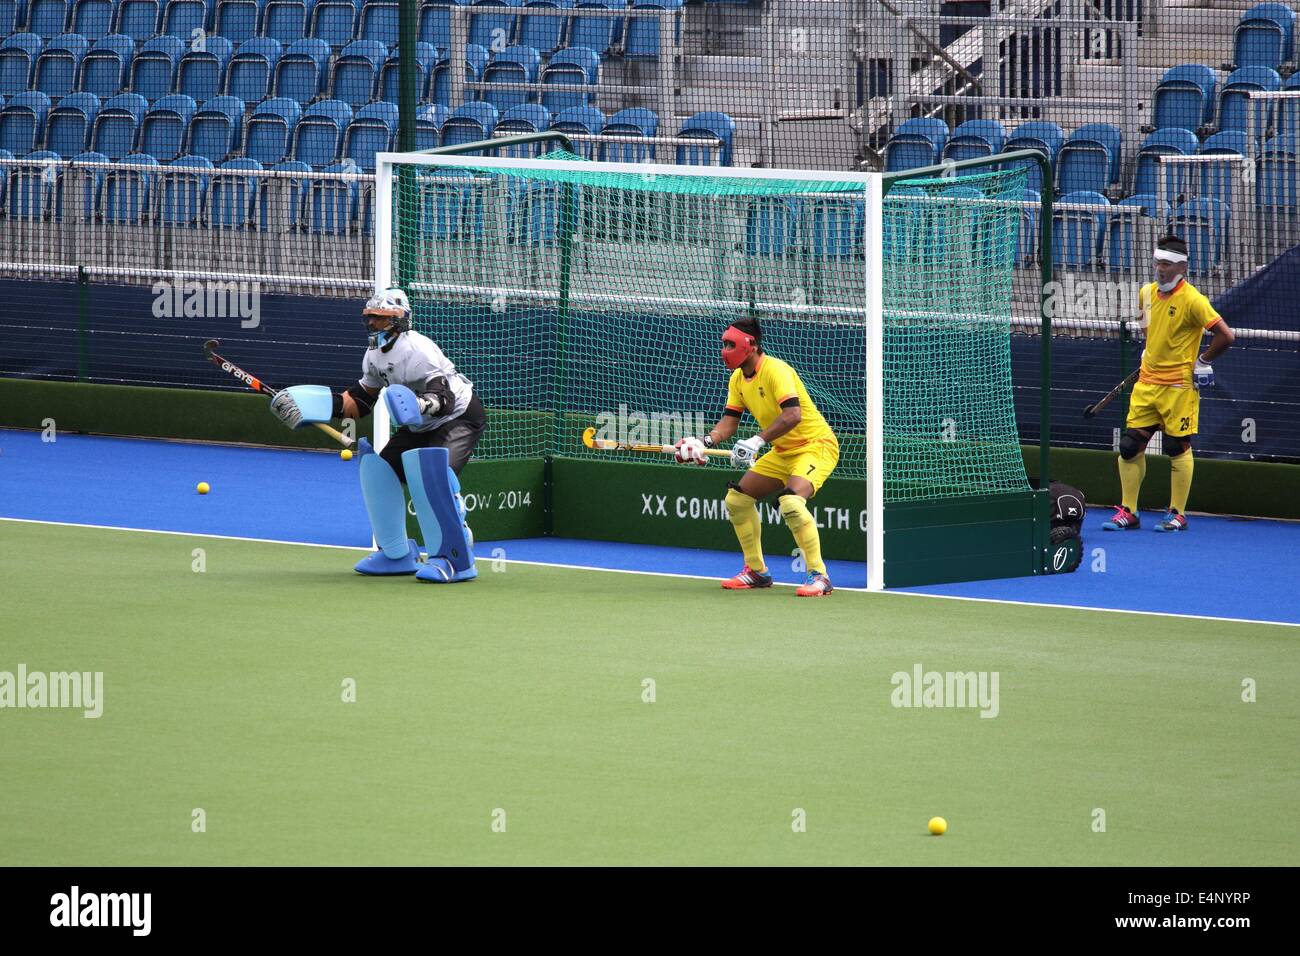 Glasgow National Hockey Centre, Glasgow Green, Glasgow, Scotland, UK, Tuesday, 15th July, 2014. With 8 Days until the 2014 Commonwealth Games Opening Ceremony teams are using the venues for training with members of Team India seen here Stock Photo